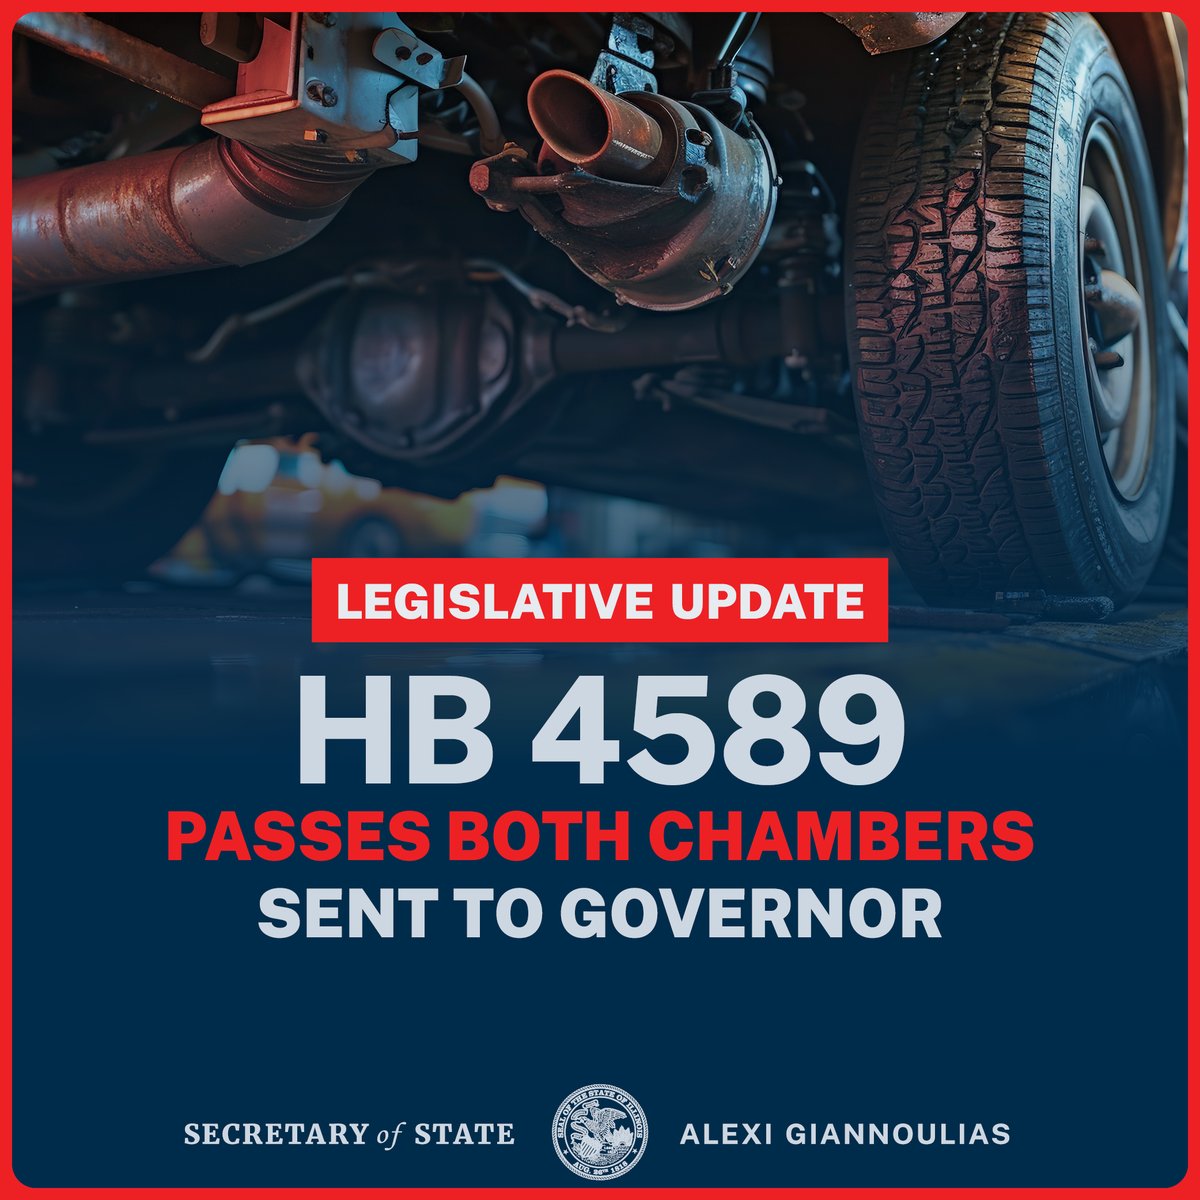 🚨 LEGISLATIVE UPDATE: House Bill 4589 – Preventing Auto Theft – has PASSED BOTH CHAMBERS and will be sent to the governor! The proposed legislation defines terms and makes technical changes to various Illinois laws regarding catalytic converters and their theft. #HB4589